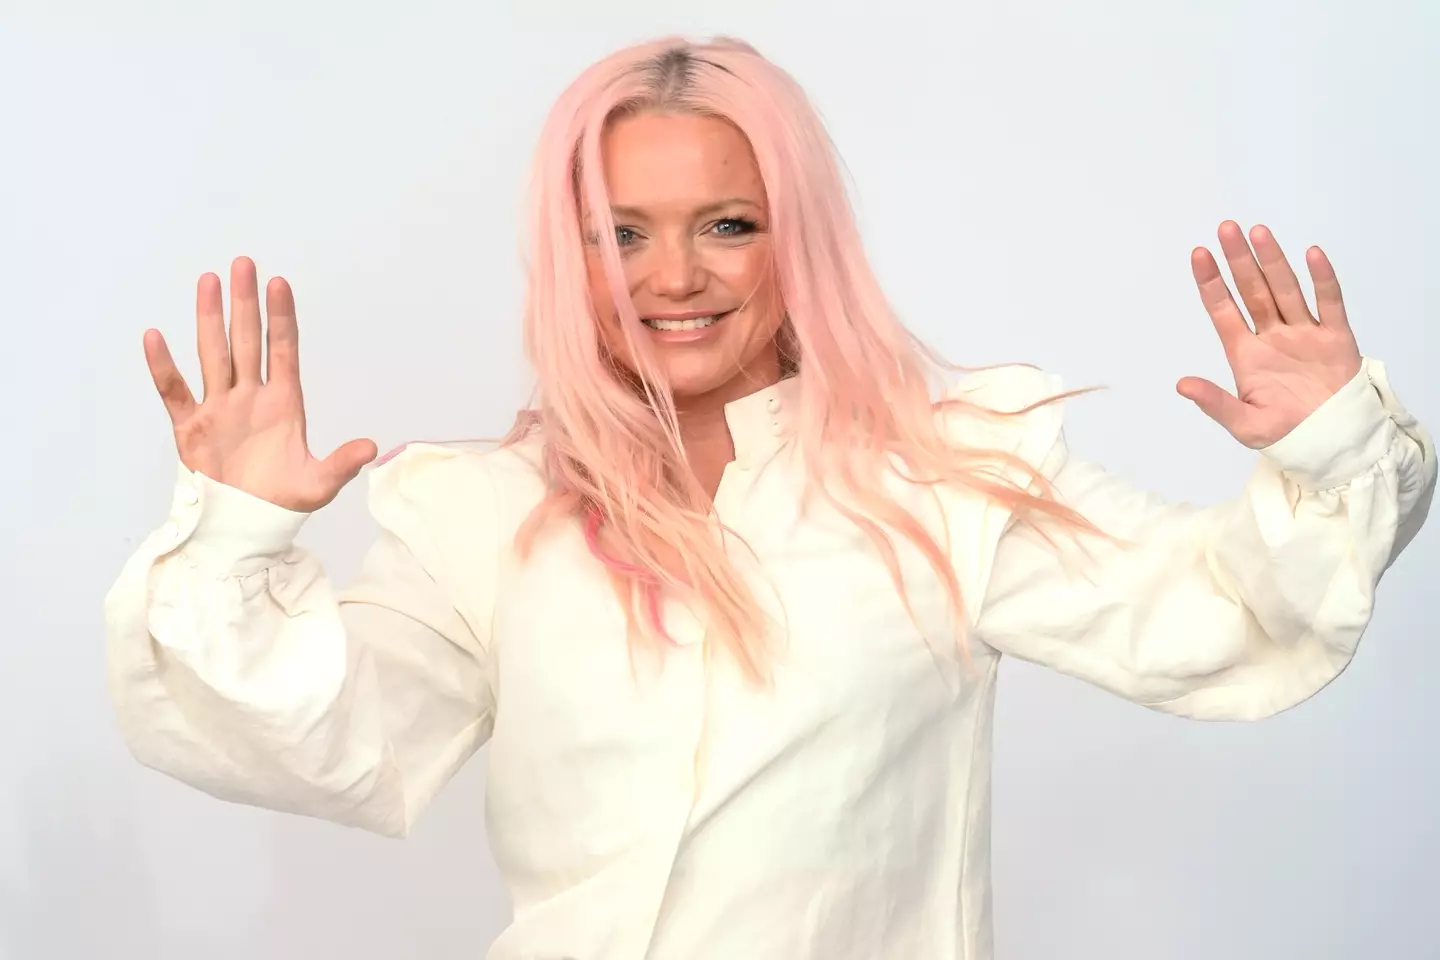 Reports suggested Hannah Spearritt had been 'left out' of the reunion tour.